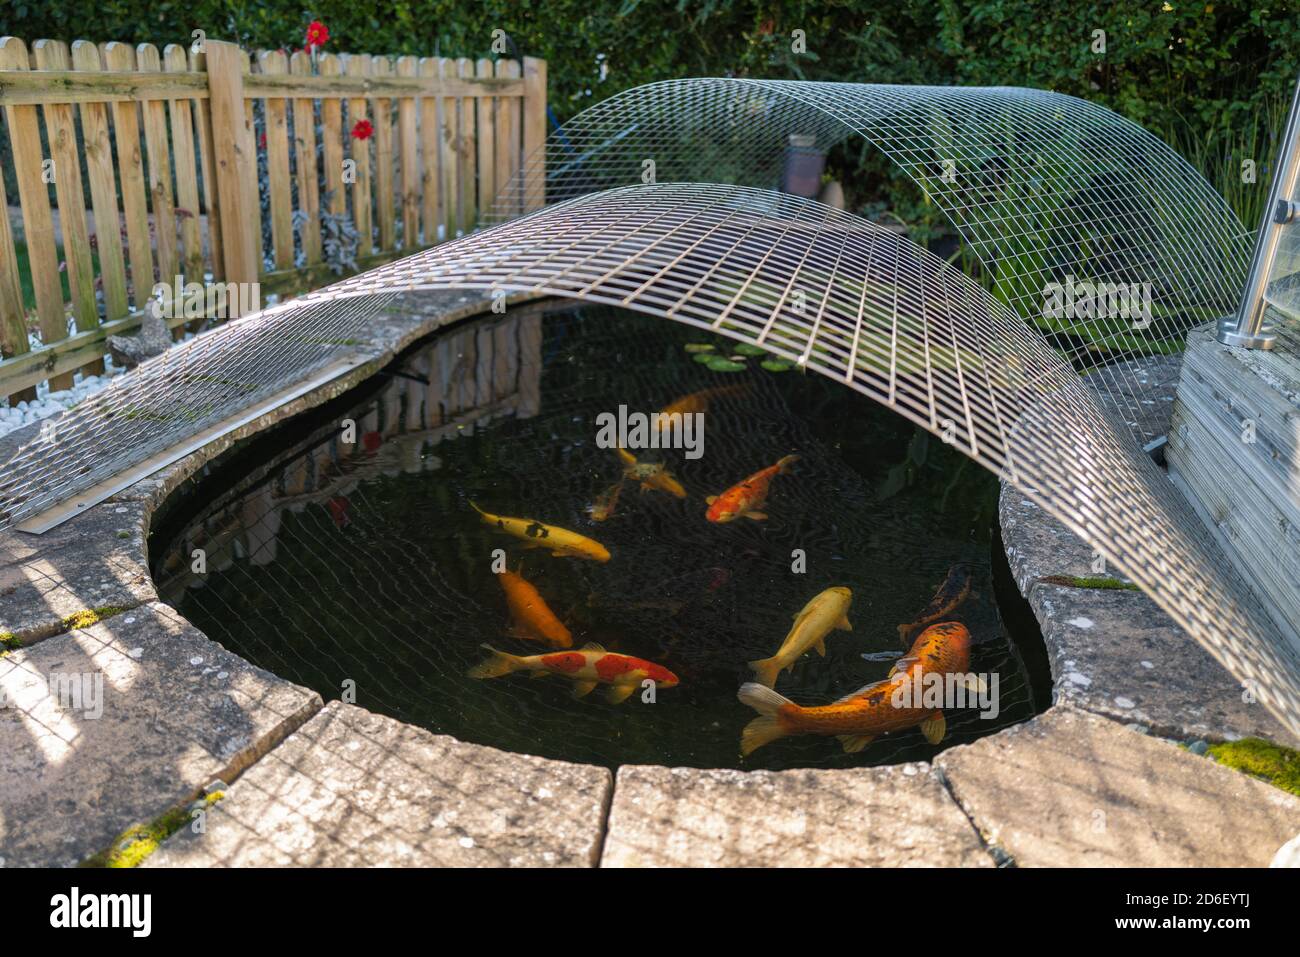 Koi carp fish in a pond with a mesh cover heron protector and